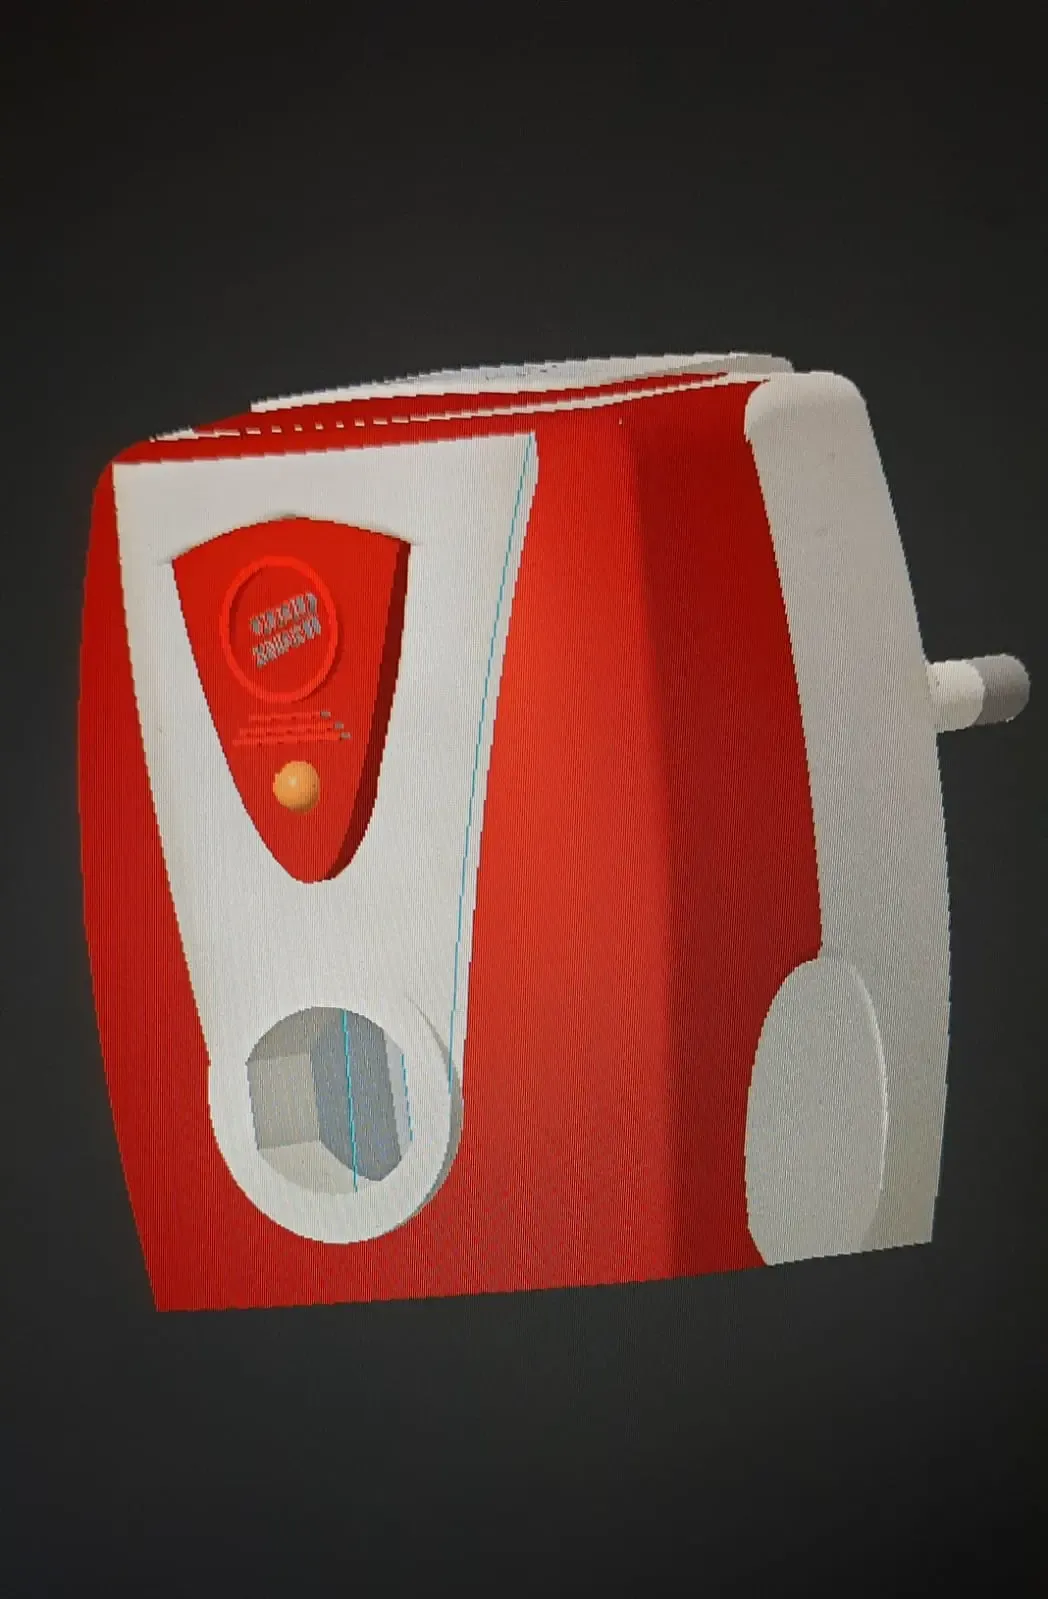 The mosquito repellent machine assembled 3d model.